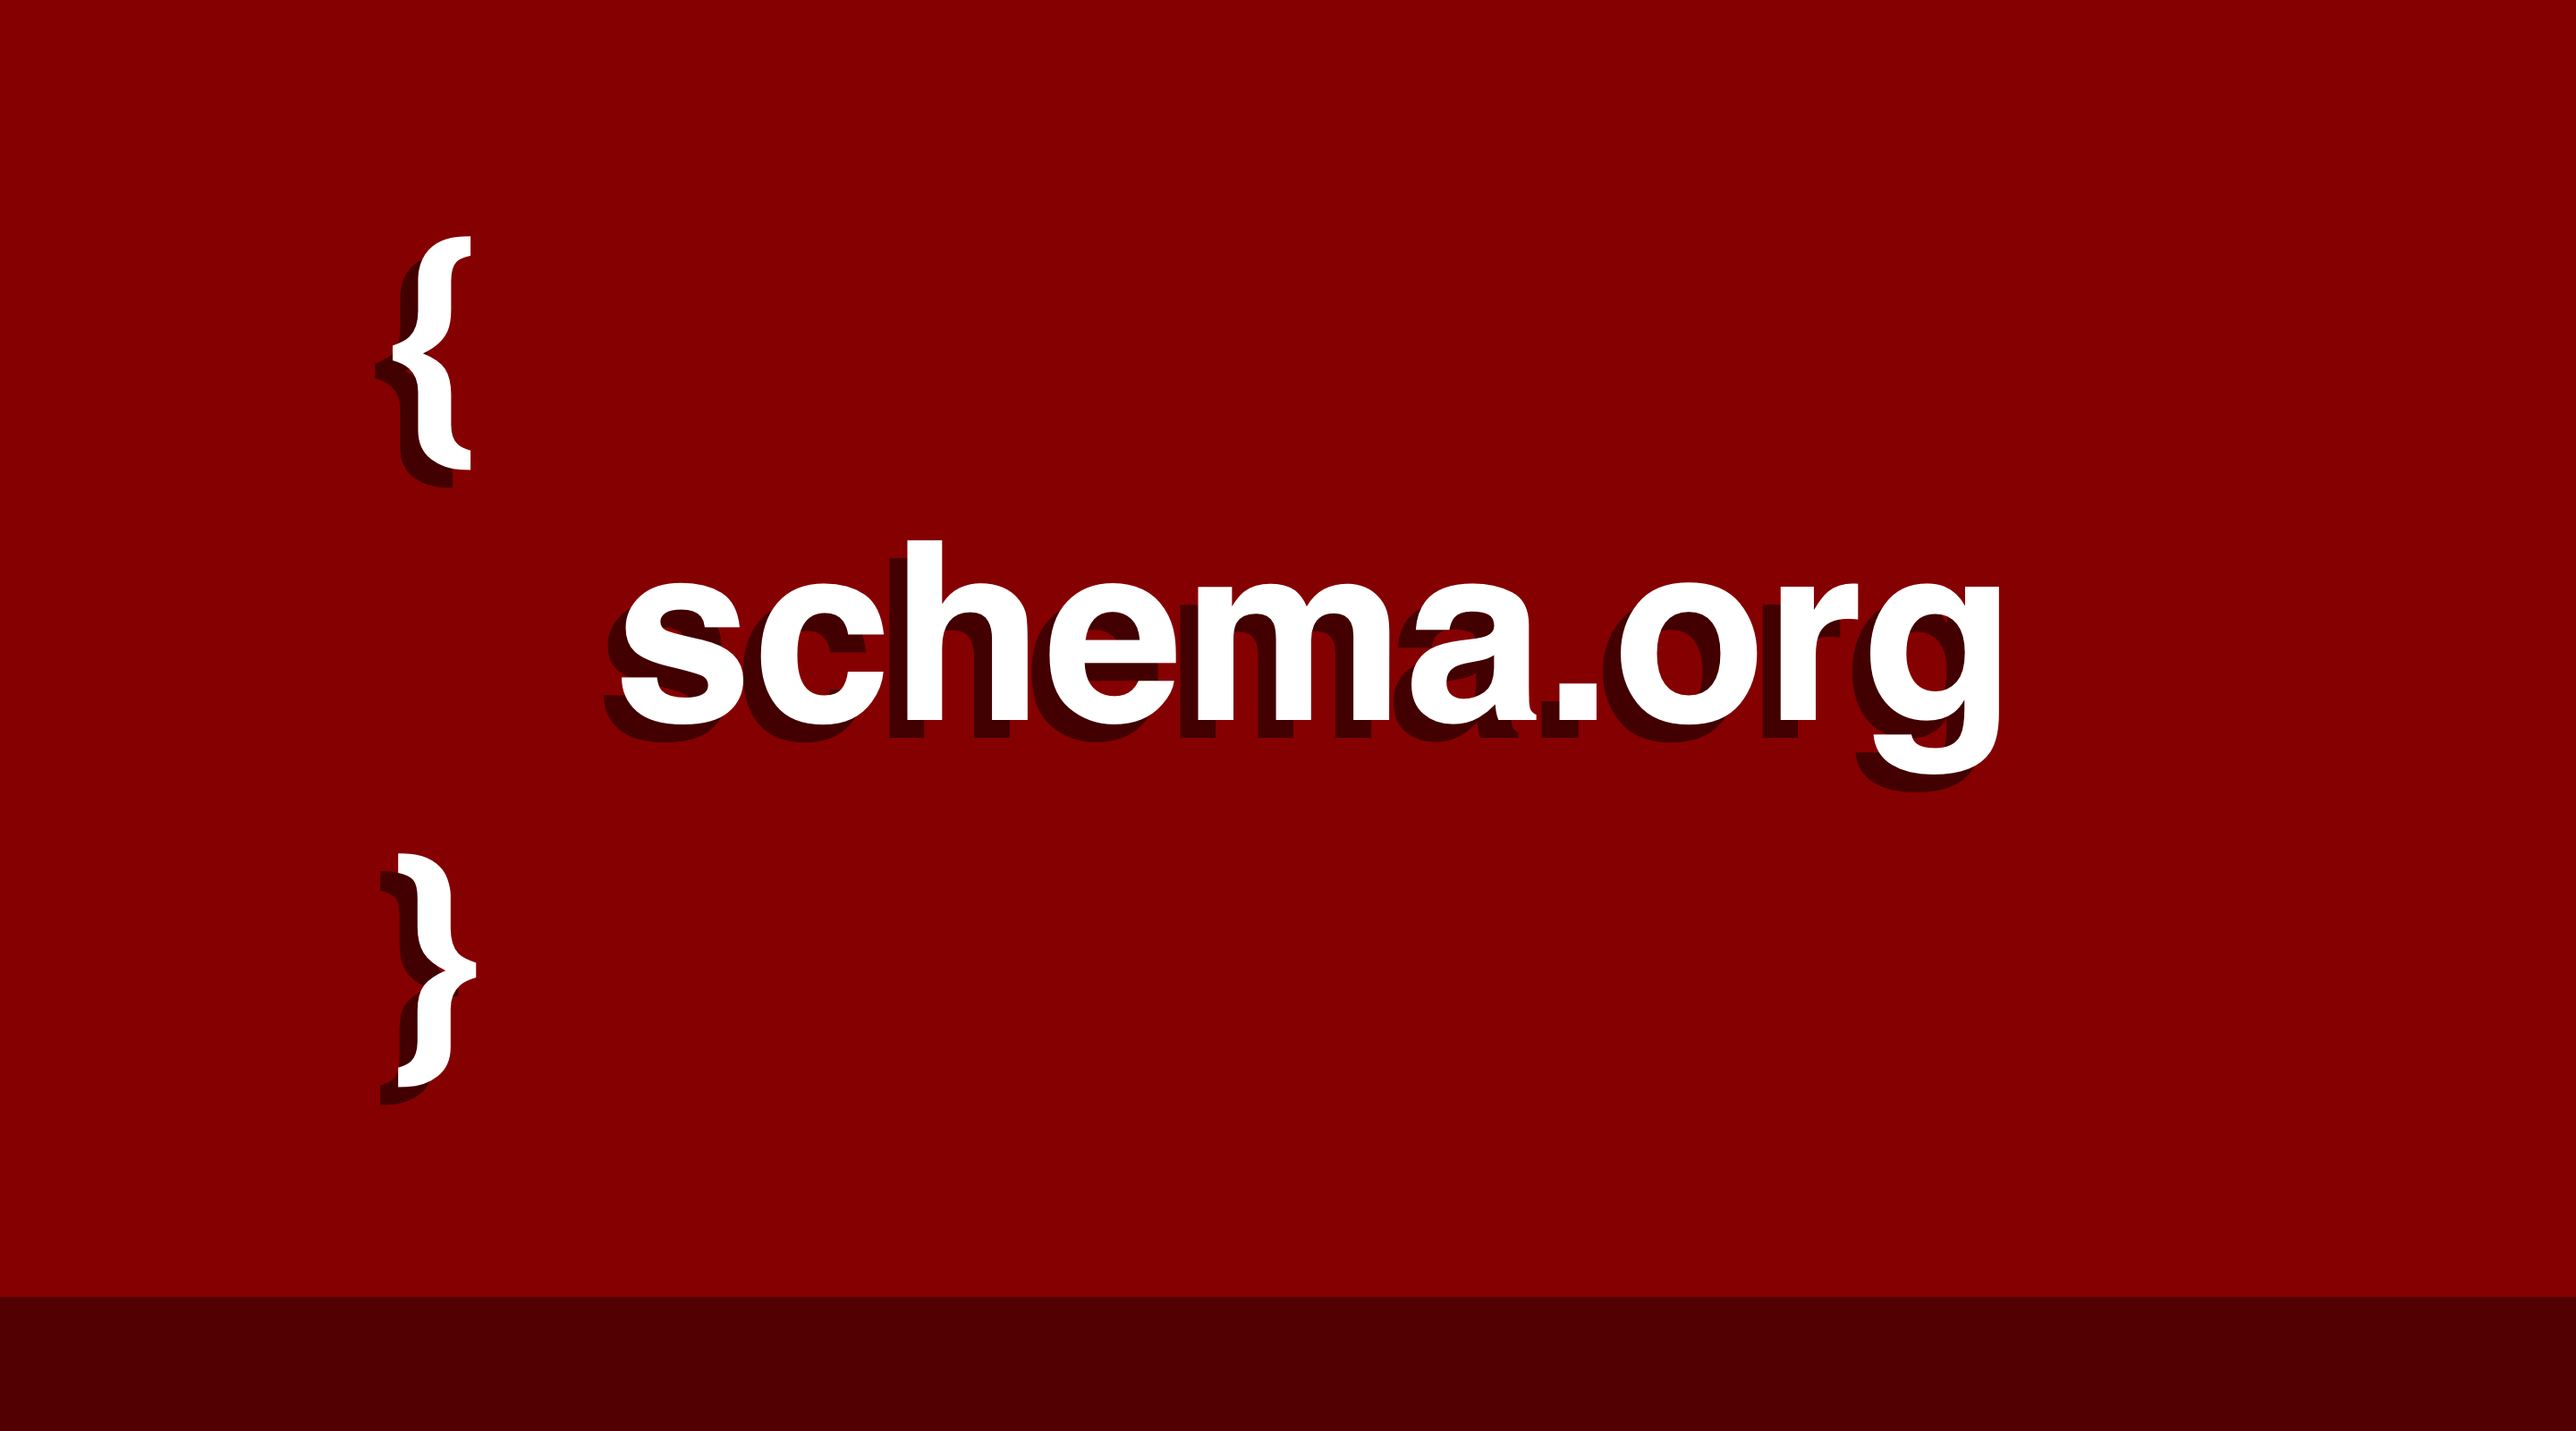 Cover Image for How to cite sources using Schema.org in JSON-LD